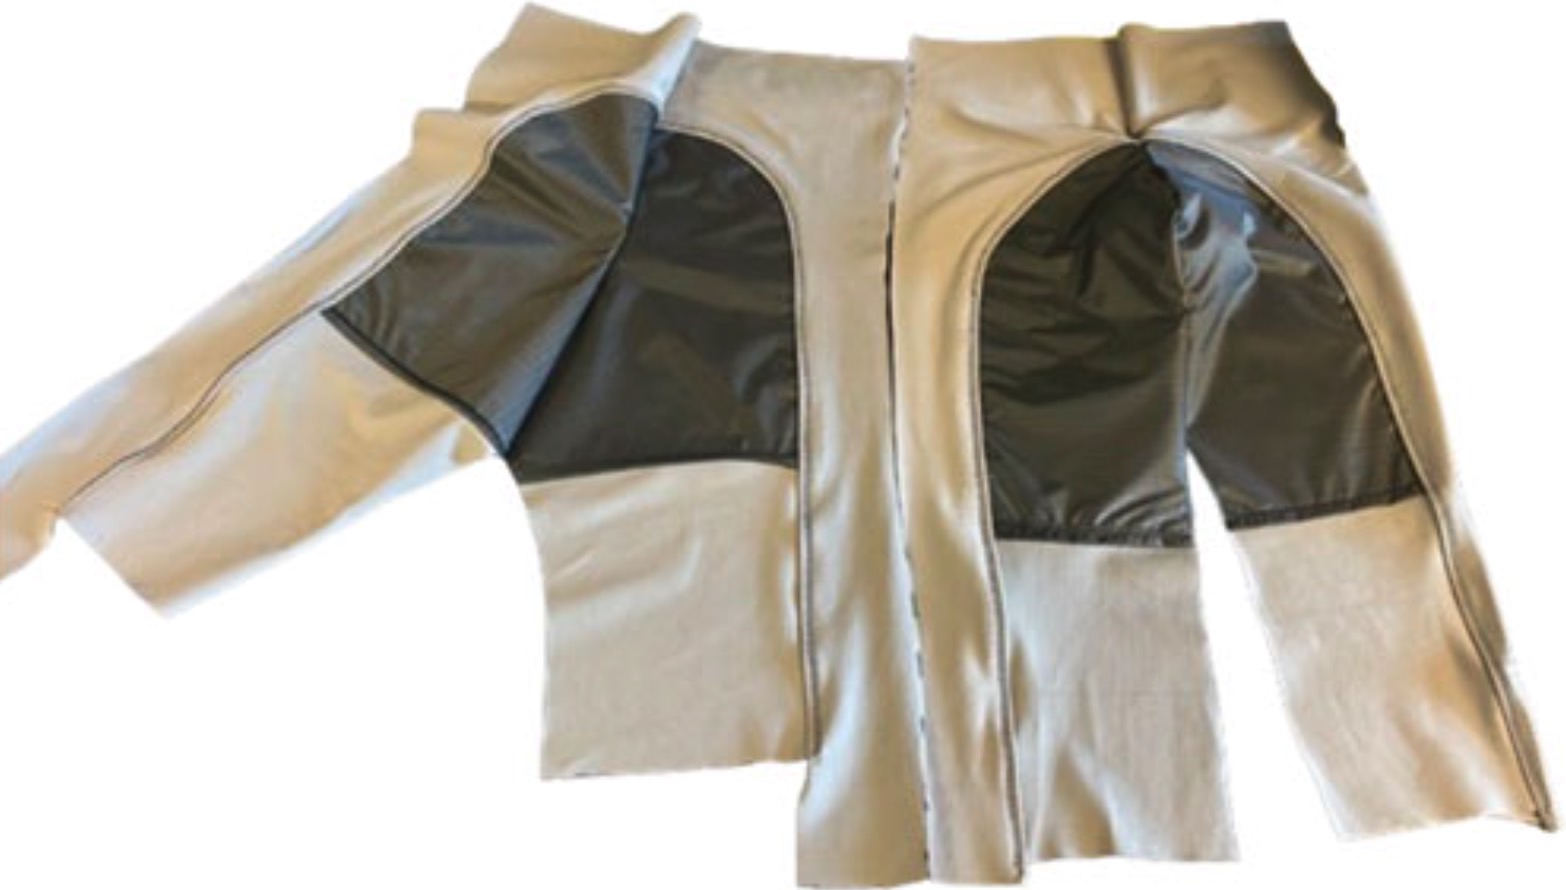 Urine collection garment prototype, back (left) and front (right).